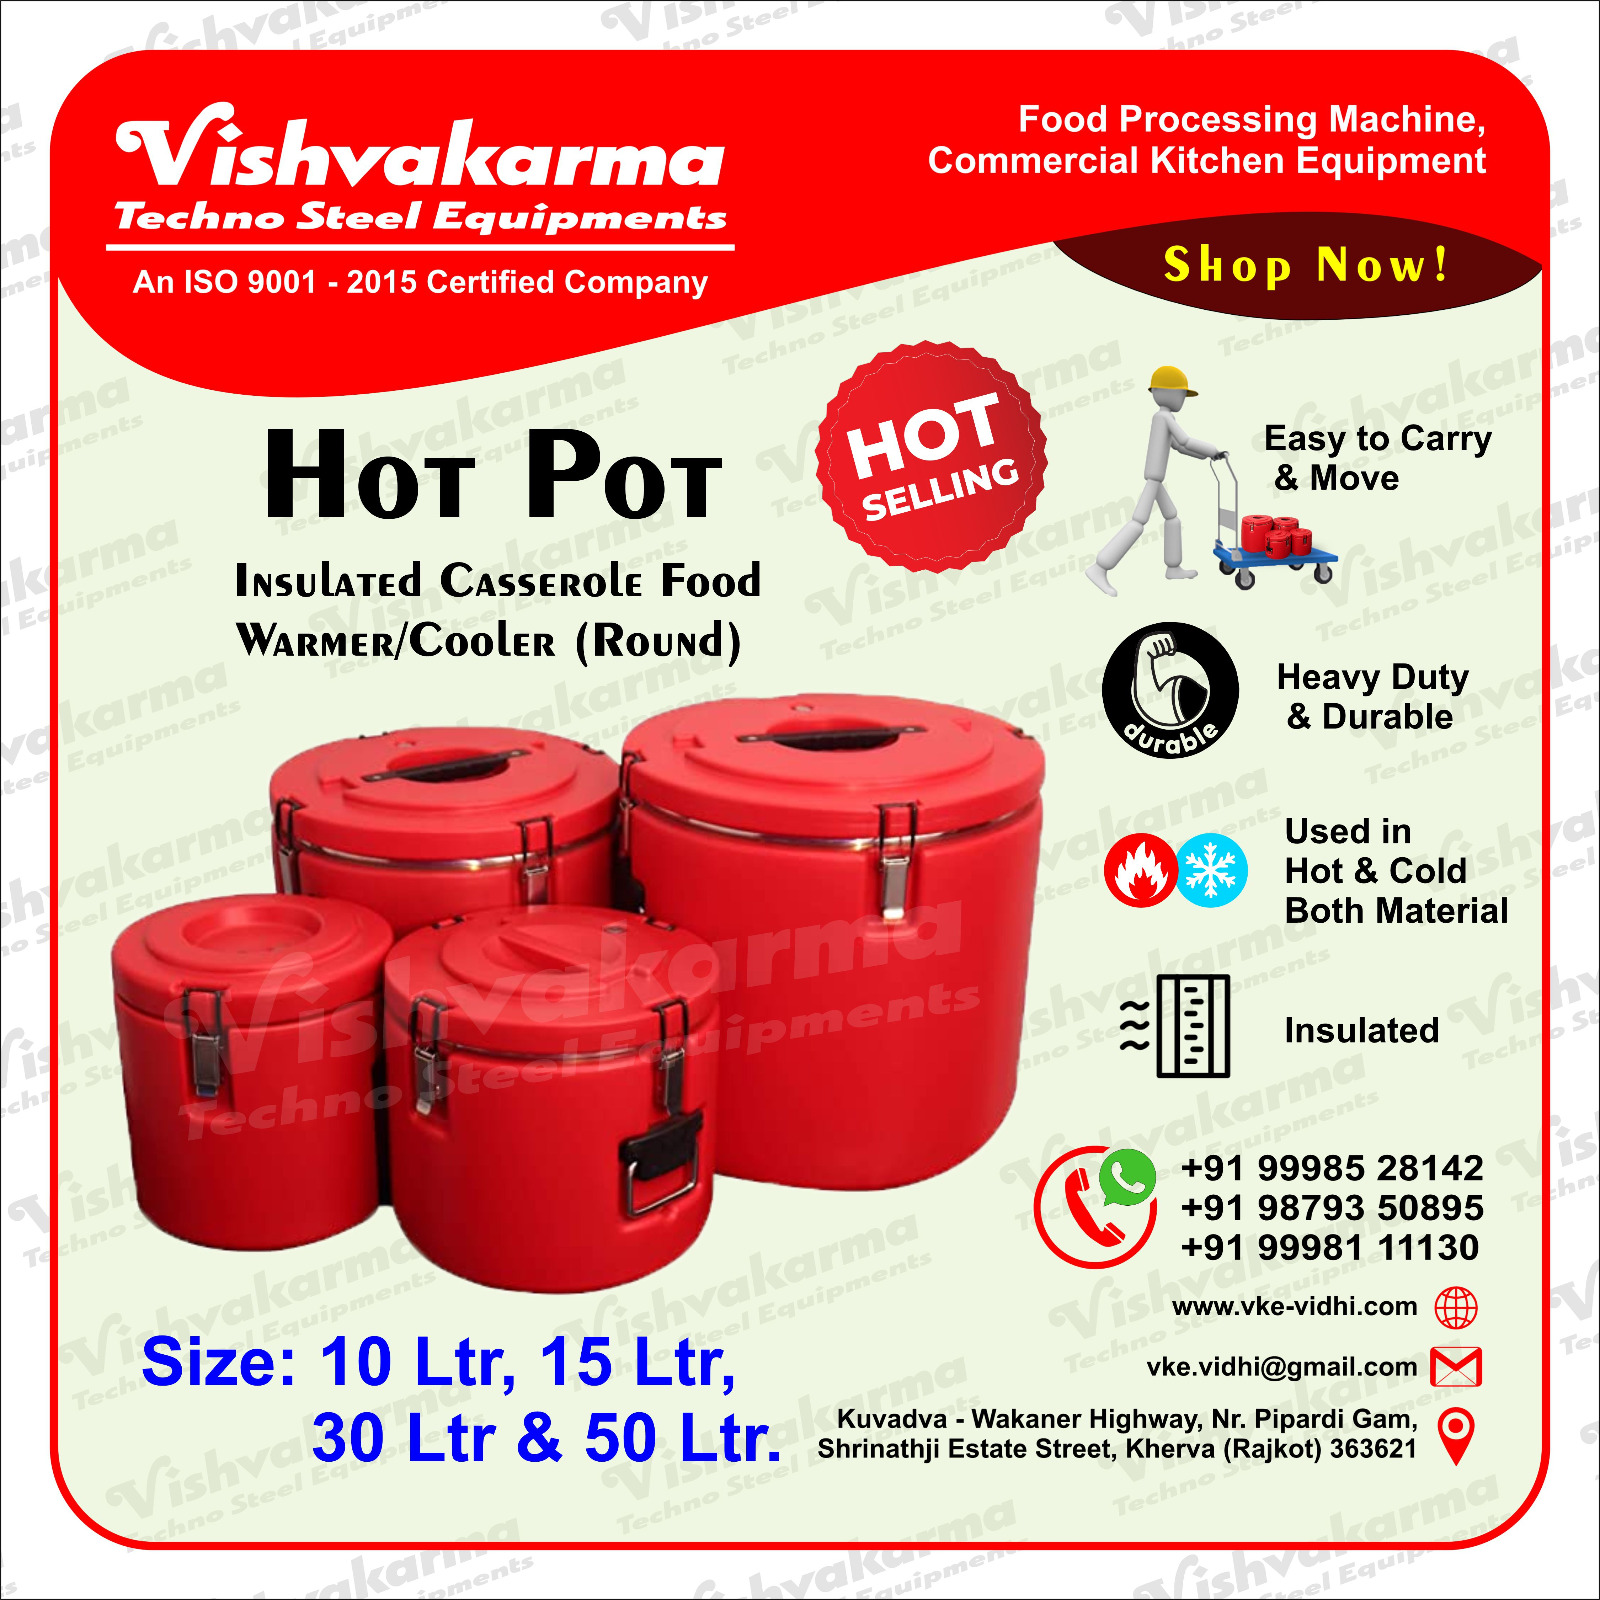 User-Friendly and Easy to Maintain Insulated Hot Pot 